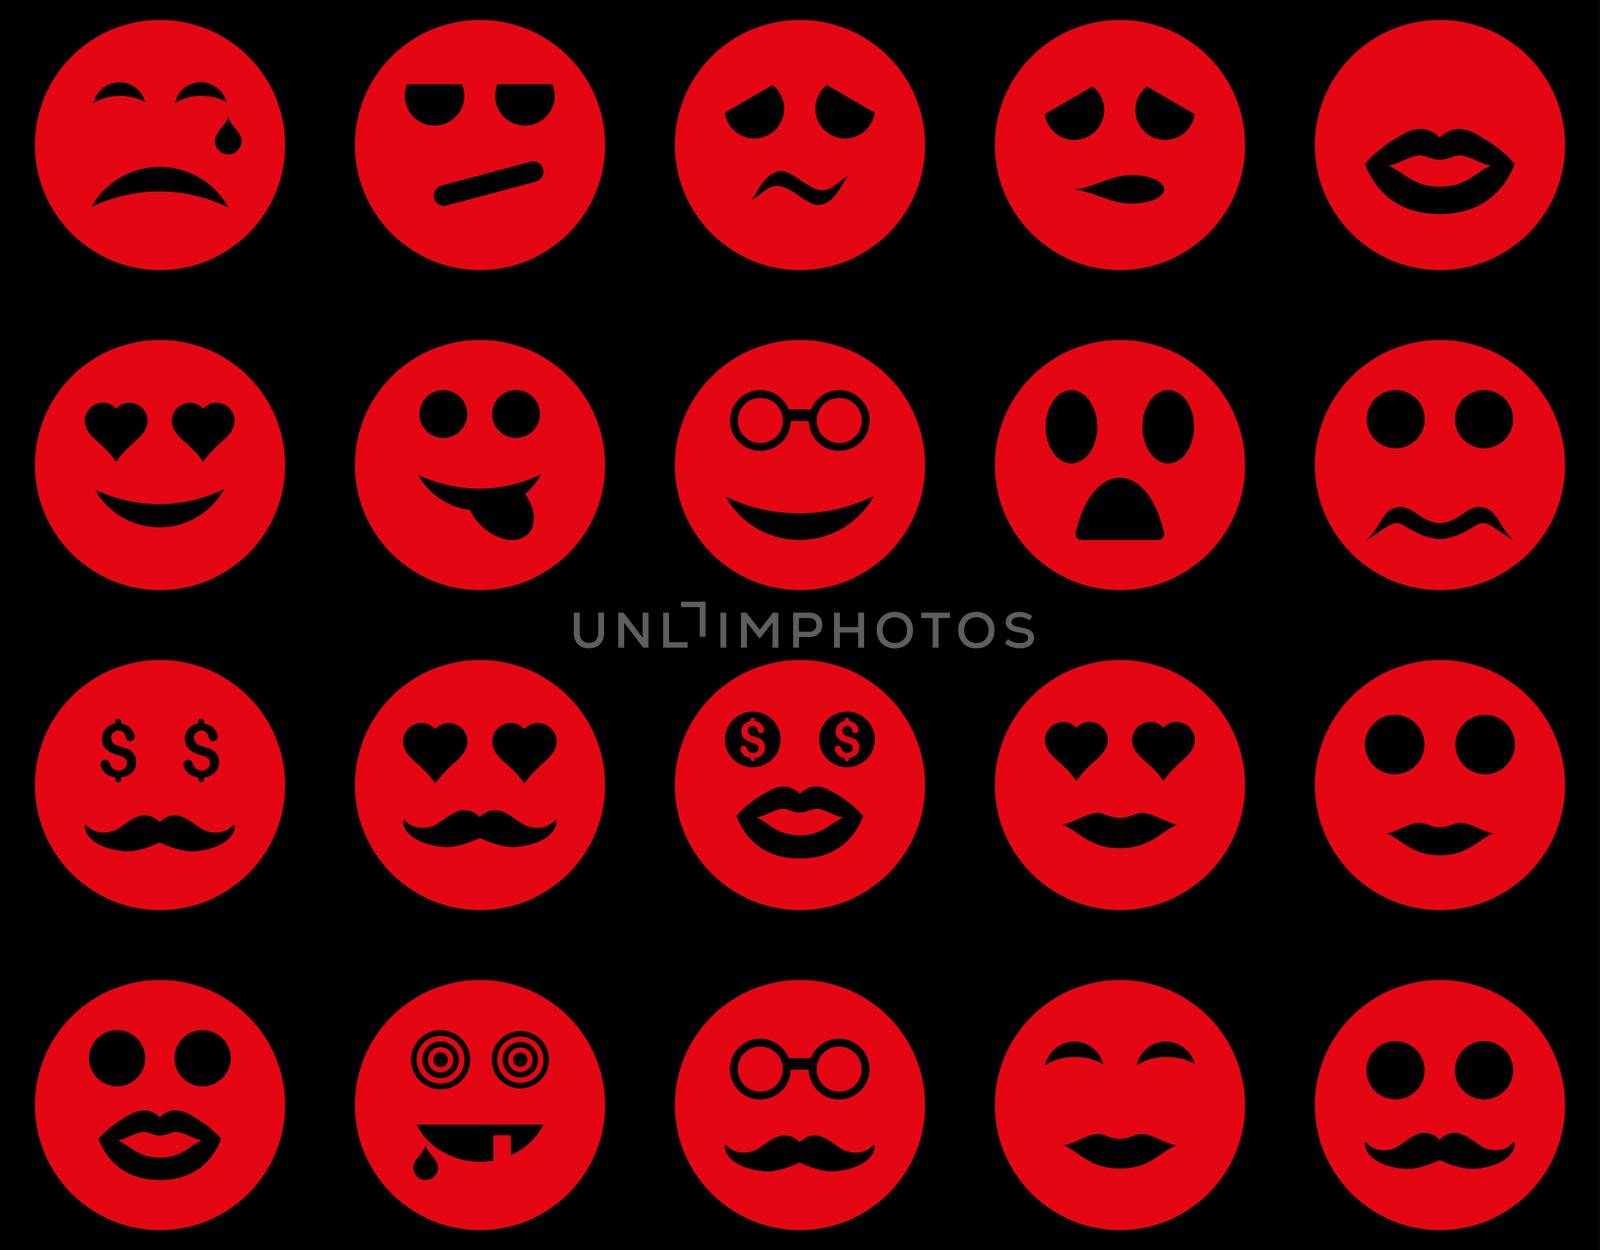 Smile and emotion icons. Glyph set style is flat images, red symbols, isolated on a black background.